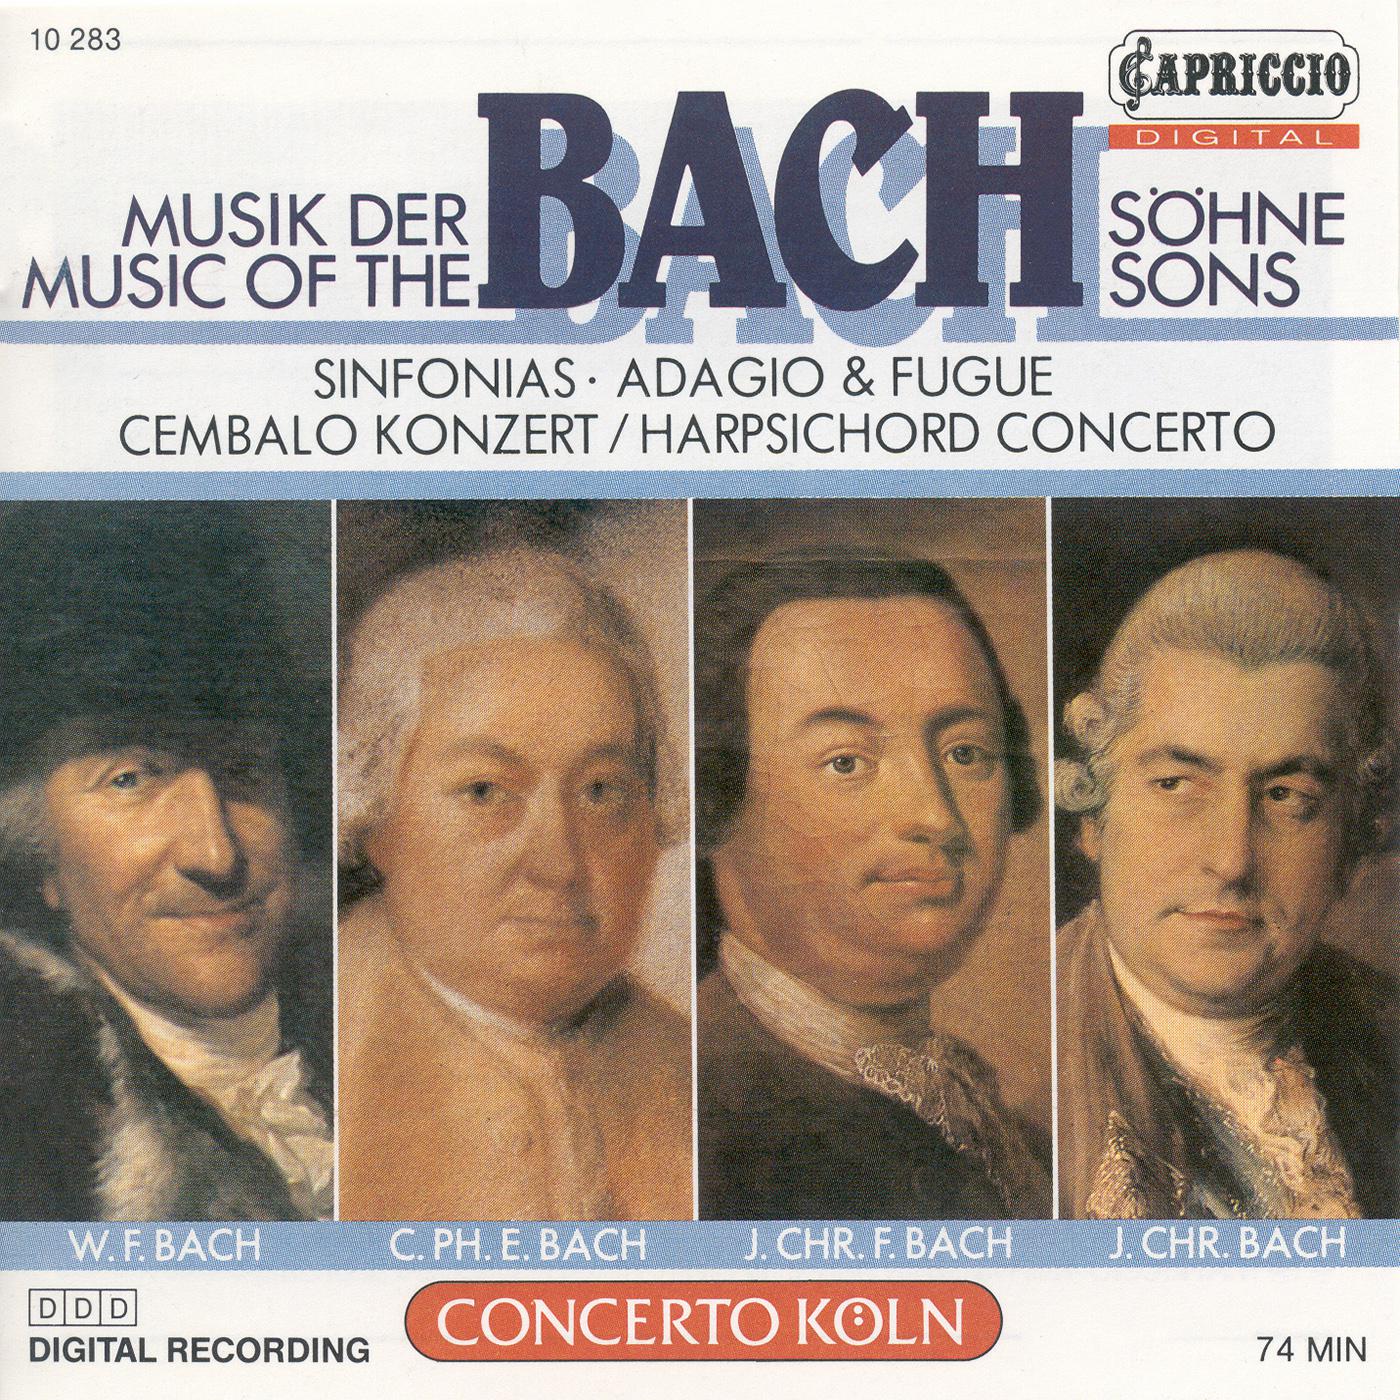 BACH SONS THE  BACH, J. C. F.  BACH, W. F.  BACH, C. P. E.  BACH, J. C. Music of the Bach Sons Concerto Koln